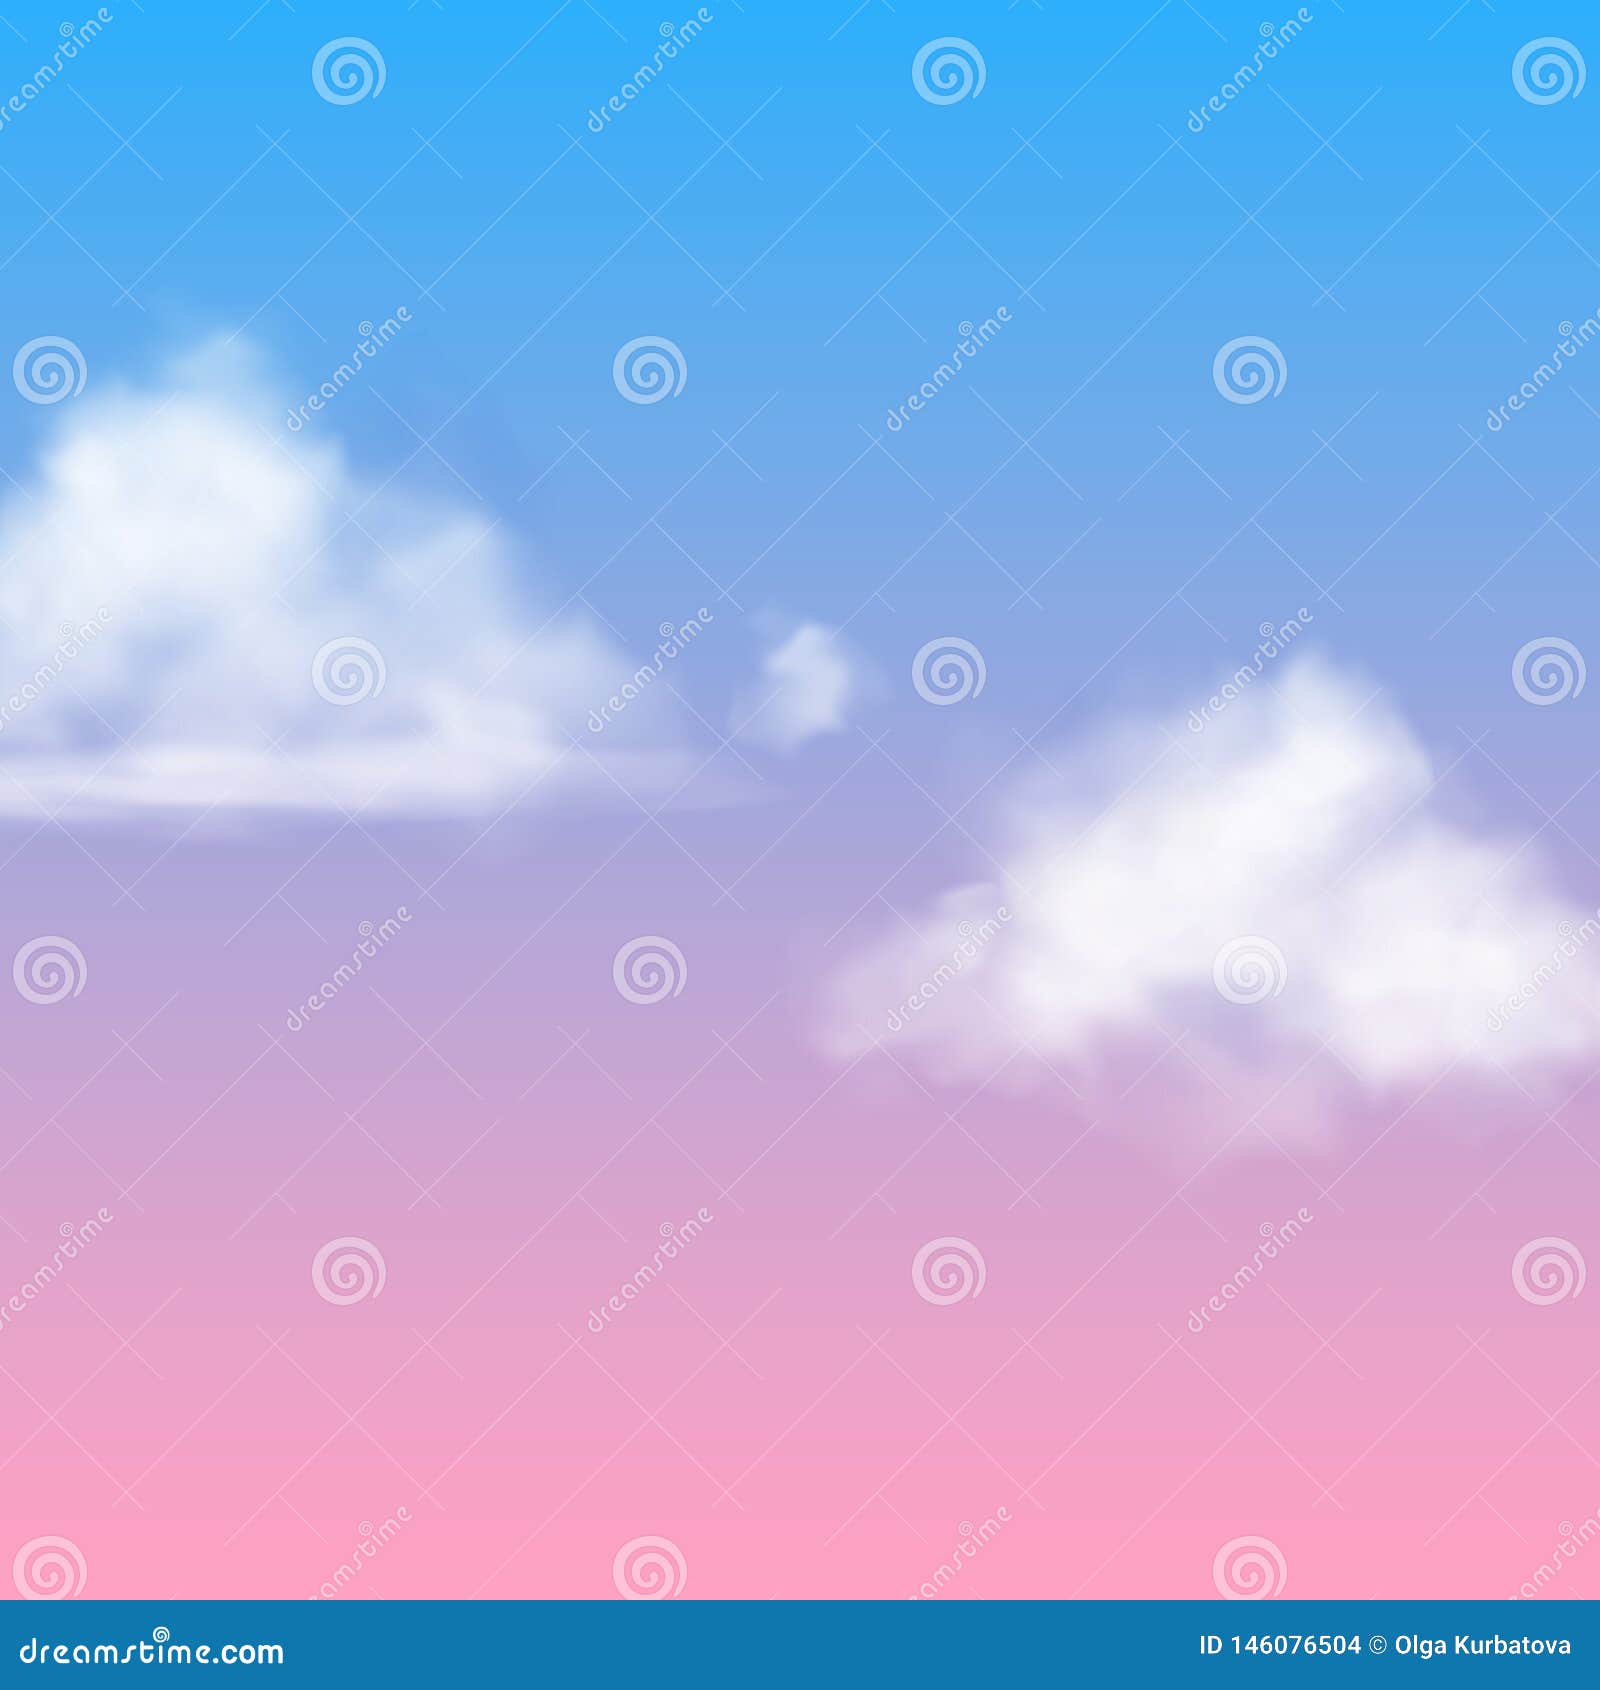 realistic cloud. white nubes fluffy sky fog clouding  on sunrise or sunset blue pink background  air